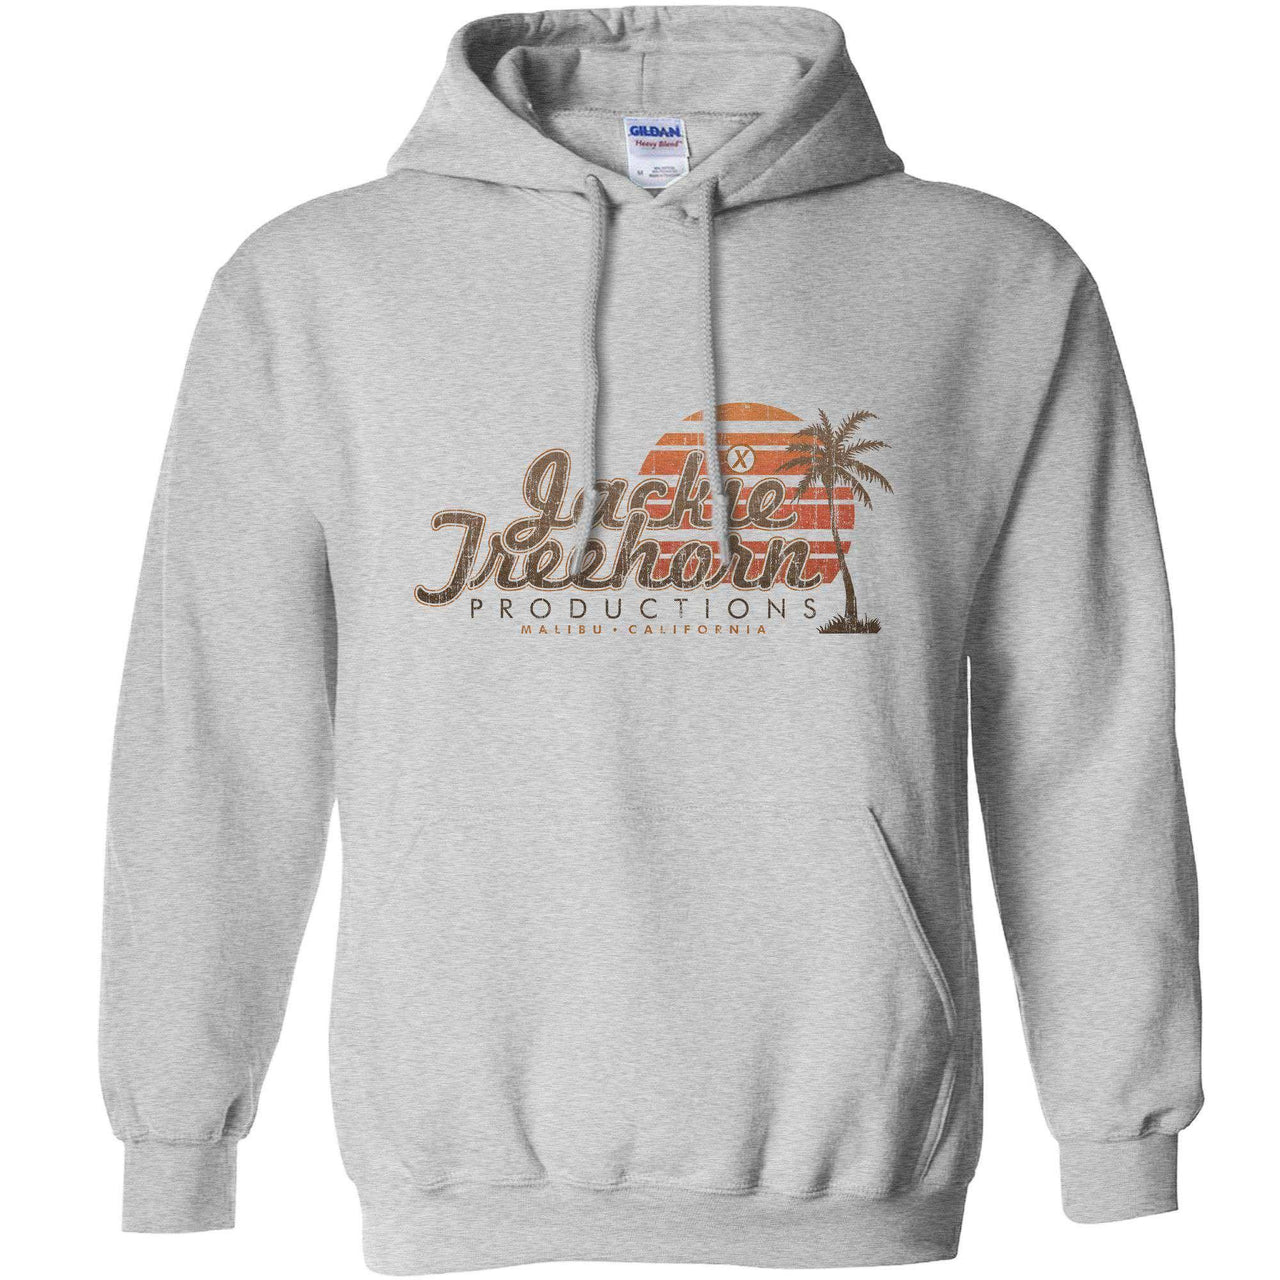 Jackie Treehorn Productions Hoodie For Men and Women 8Ball